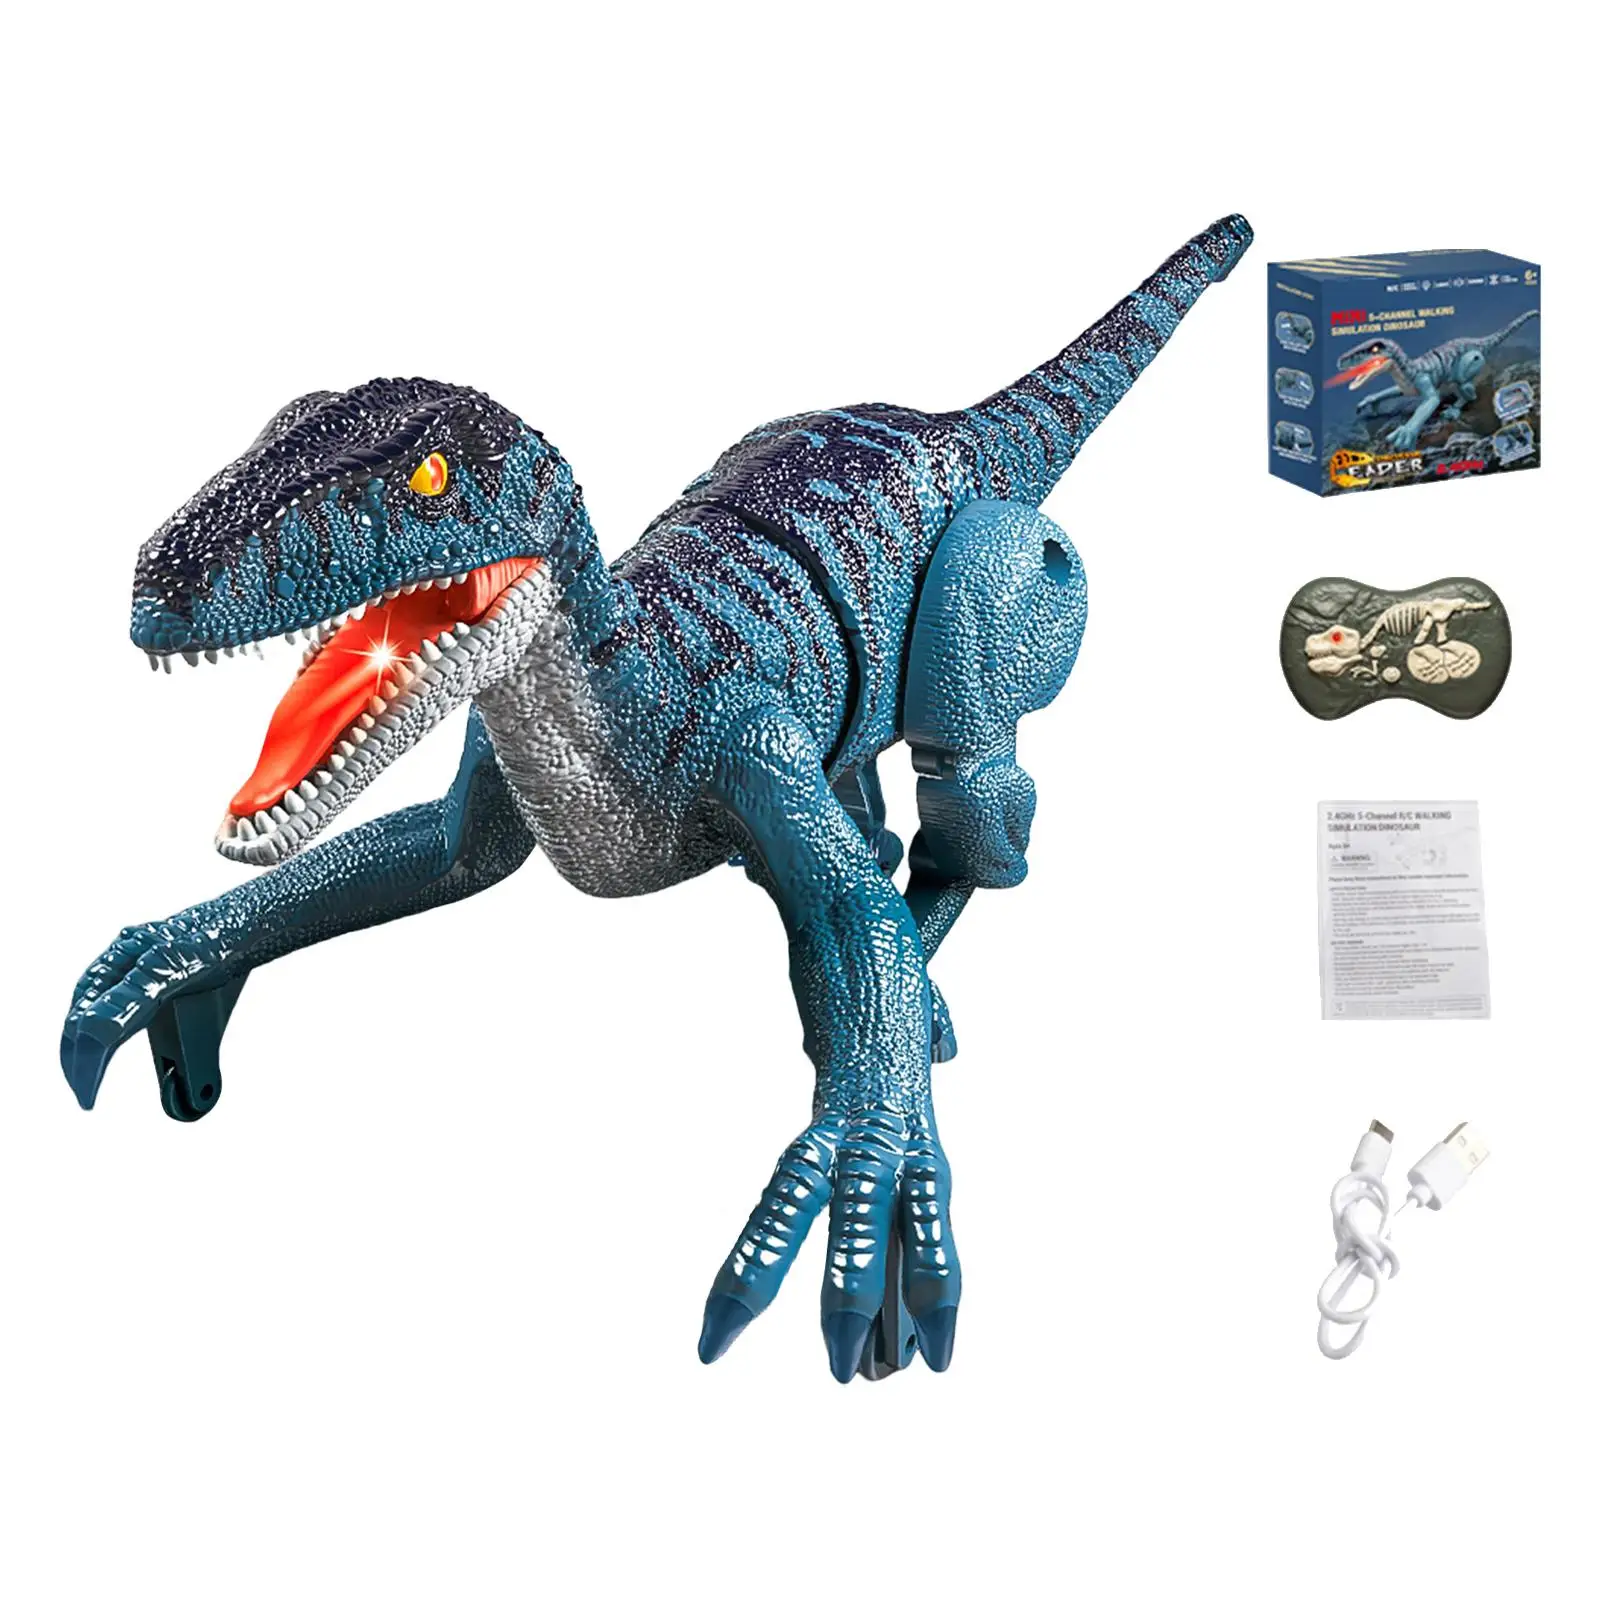 Electric Dinosaur Toys Realistic Play Dinosaur Toy Remote Control Dinosaur Toys for Toddlers Kids Girls Children Birthday Gifts